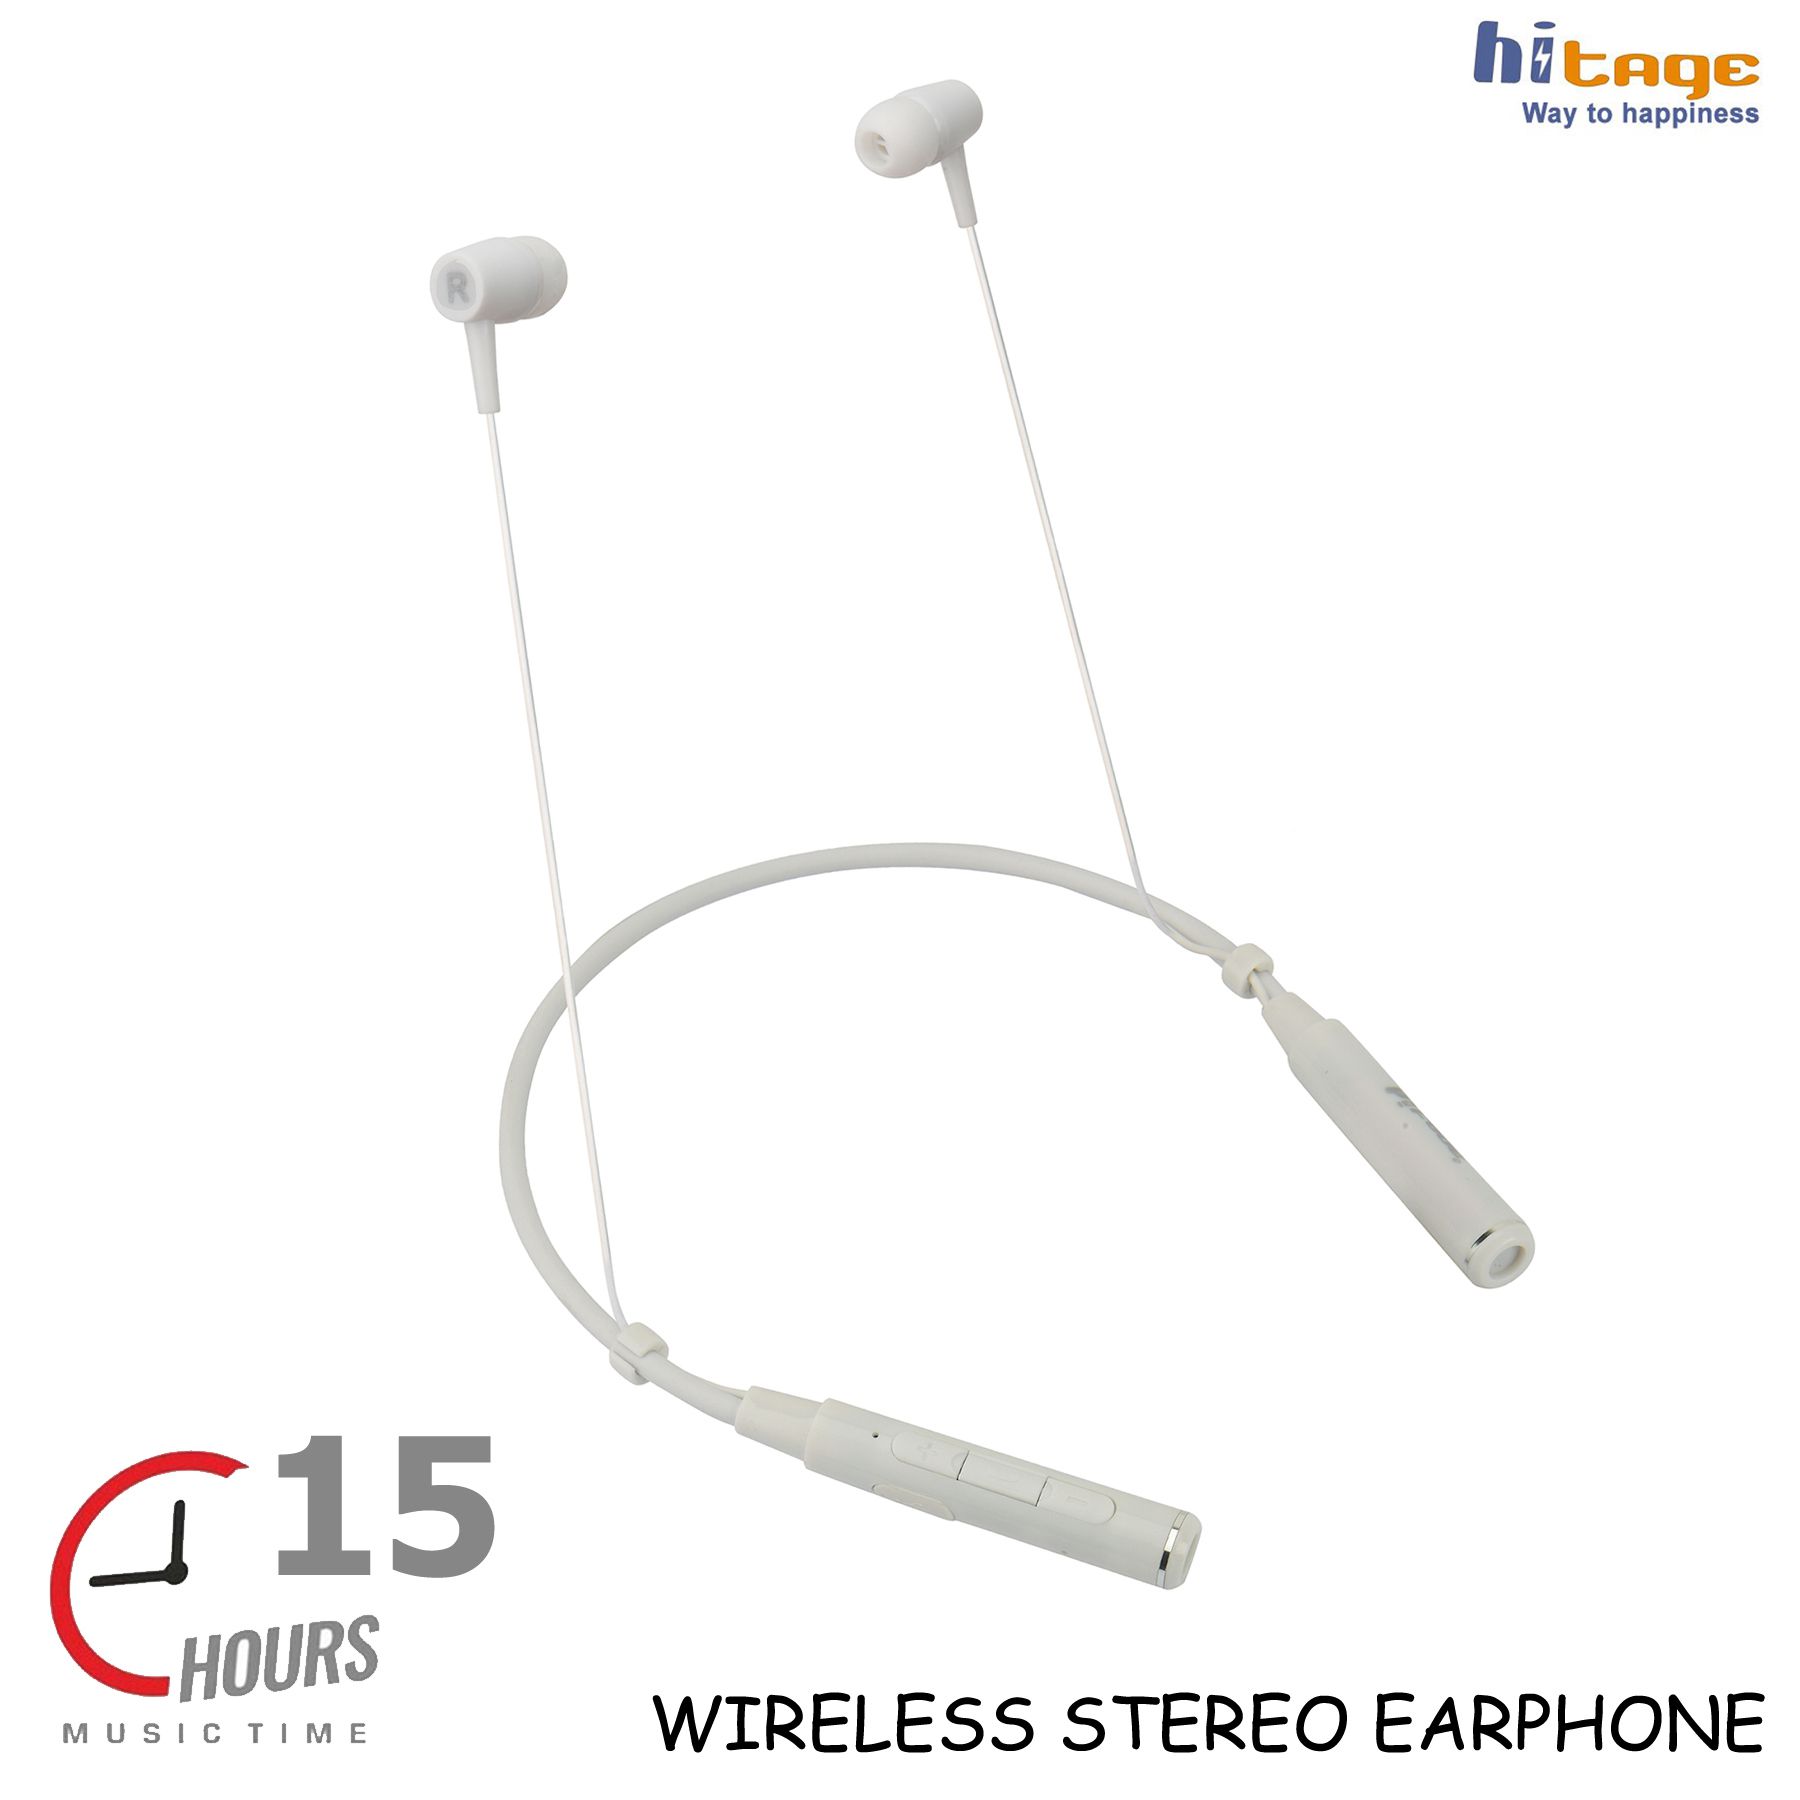 Hitage NBT-1945 ( 15 HOURS Music Playback BATTERY 5.0 Bluetooth  Wireless SPORT HEADSET Magnetic Neckband With Bass Headphones/Earphones